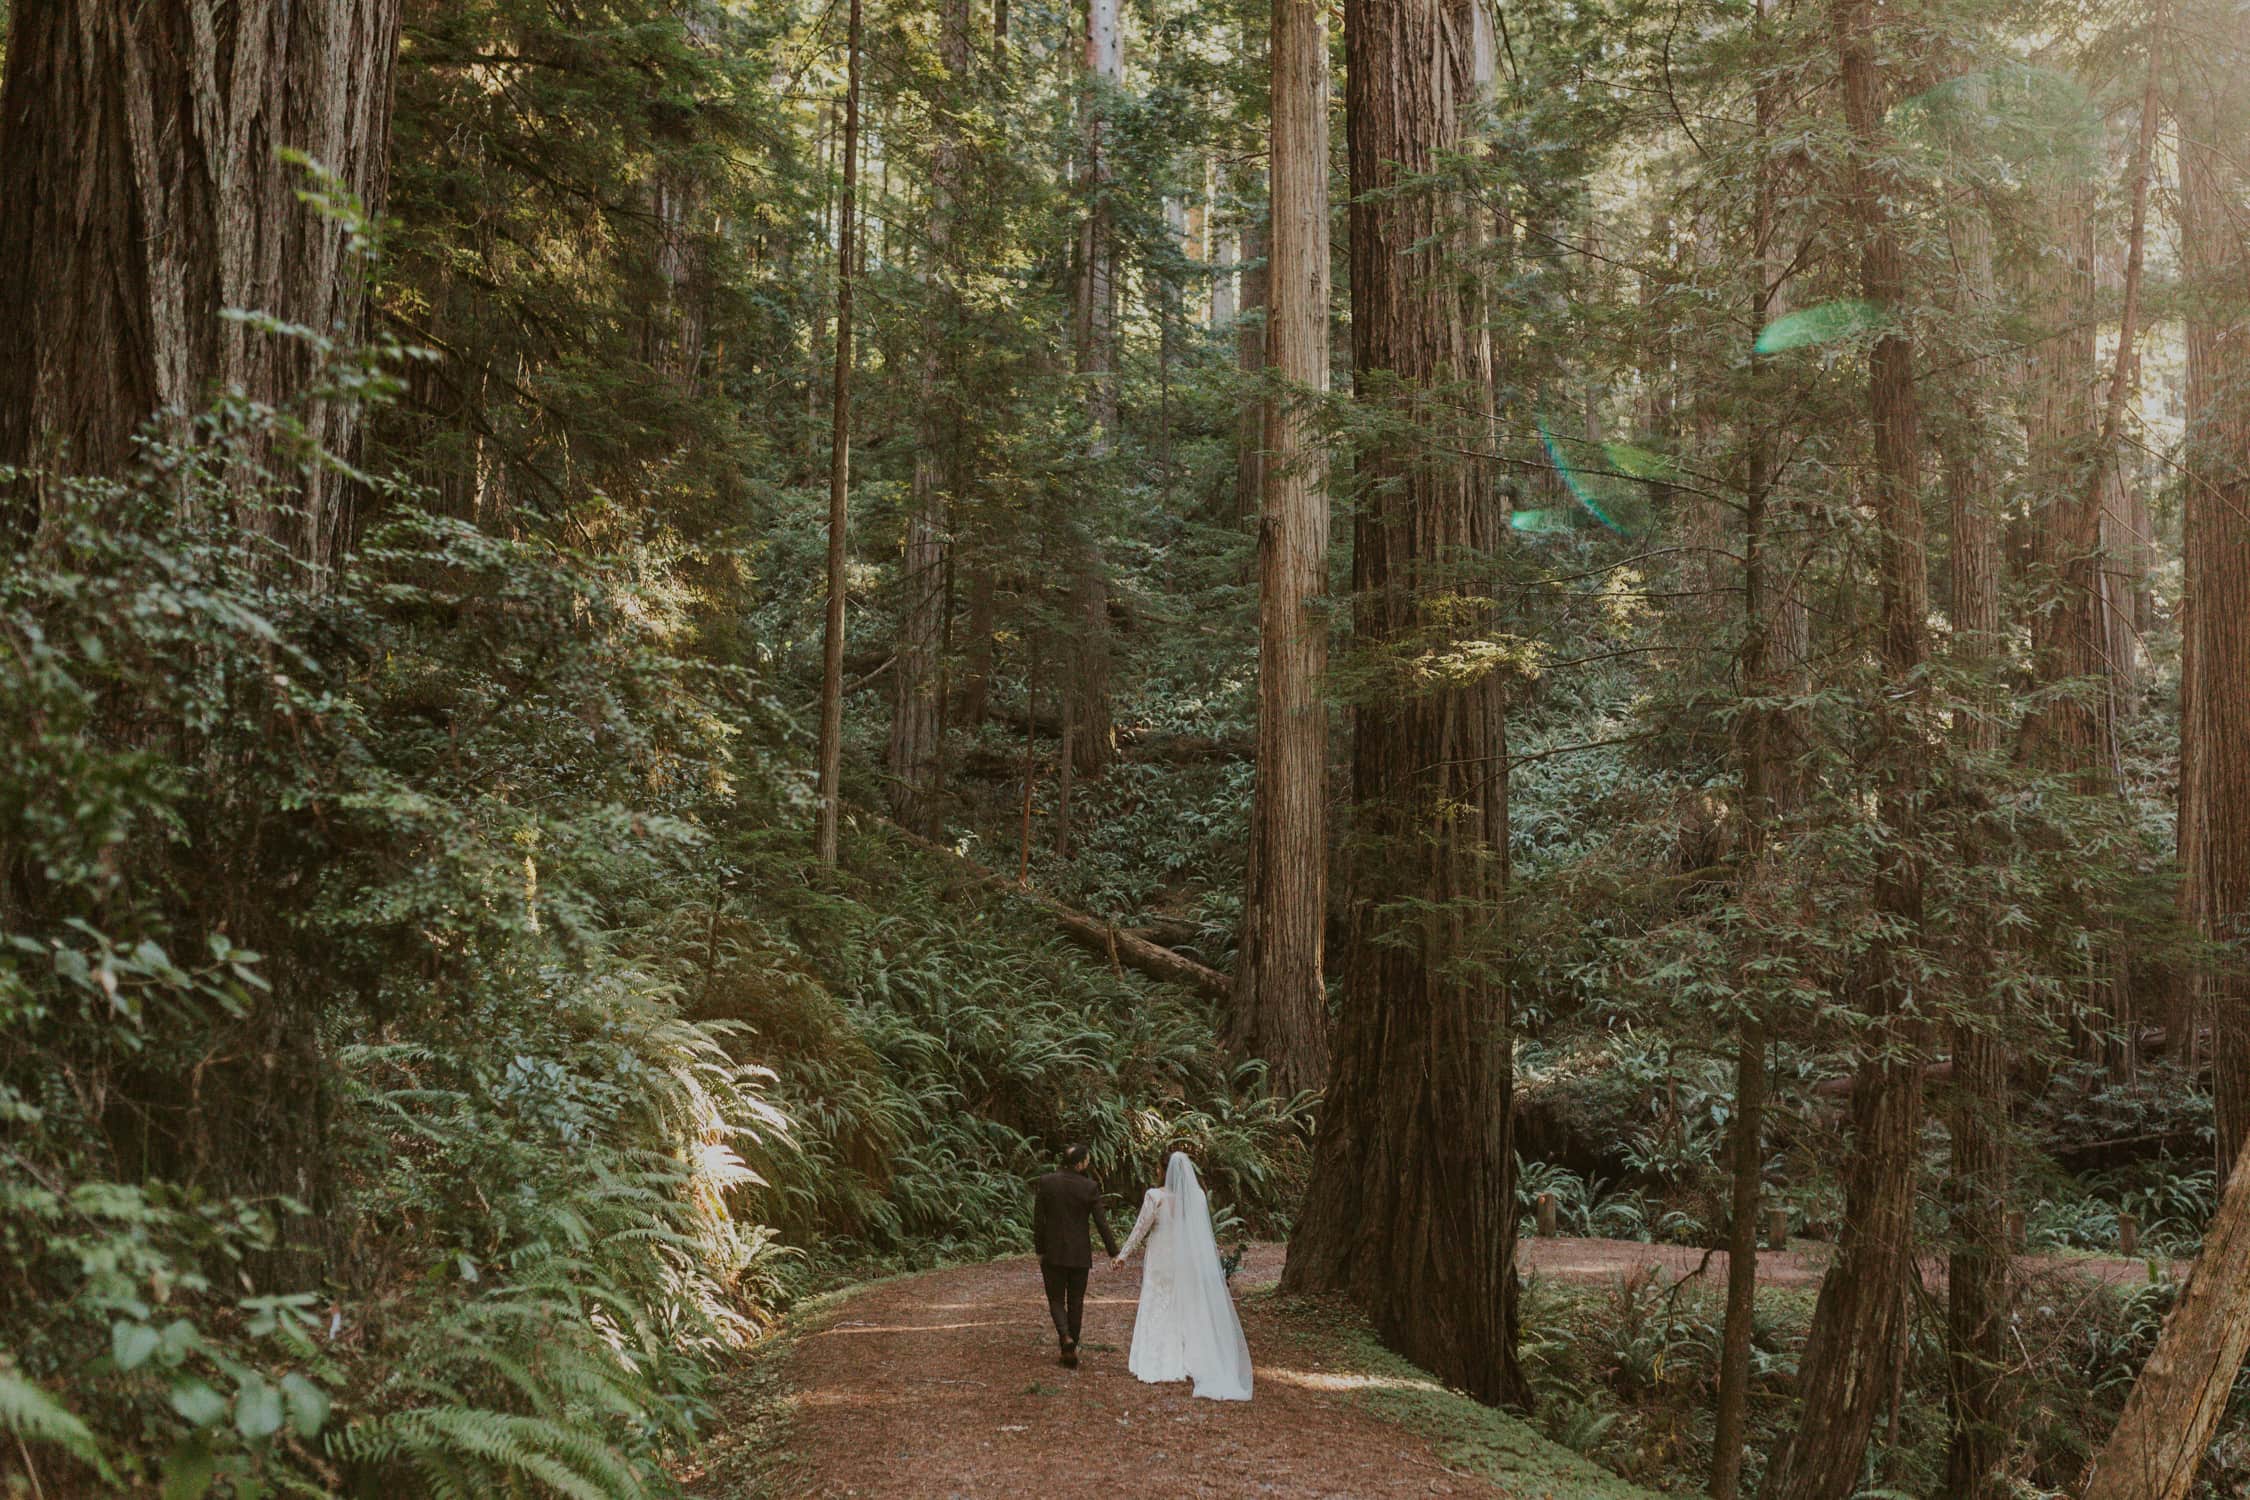 A bride and groom holding hands and walking through the redwoods.